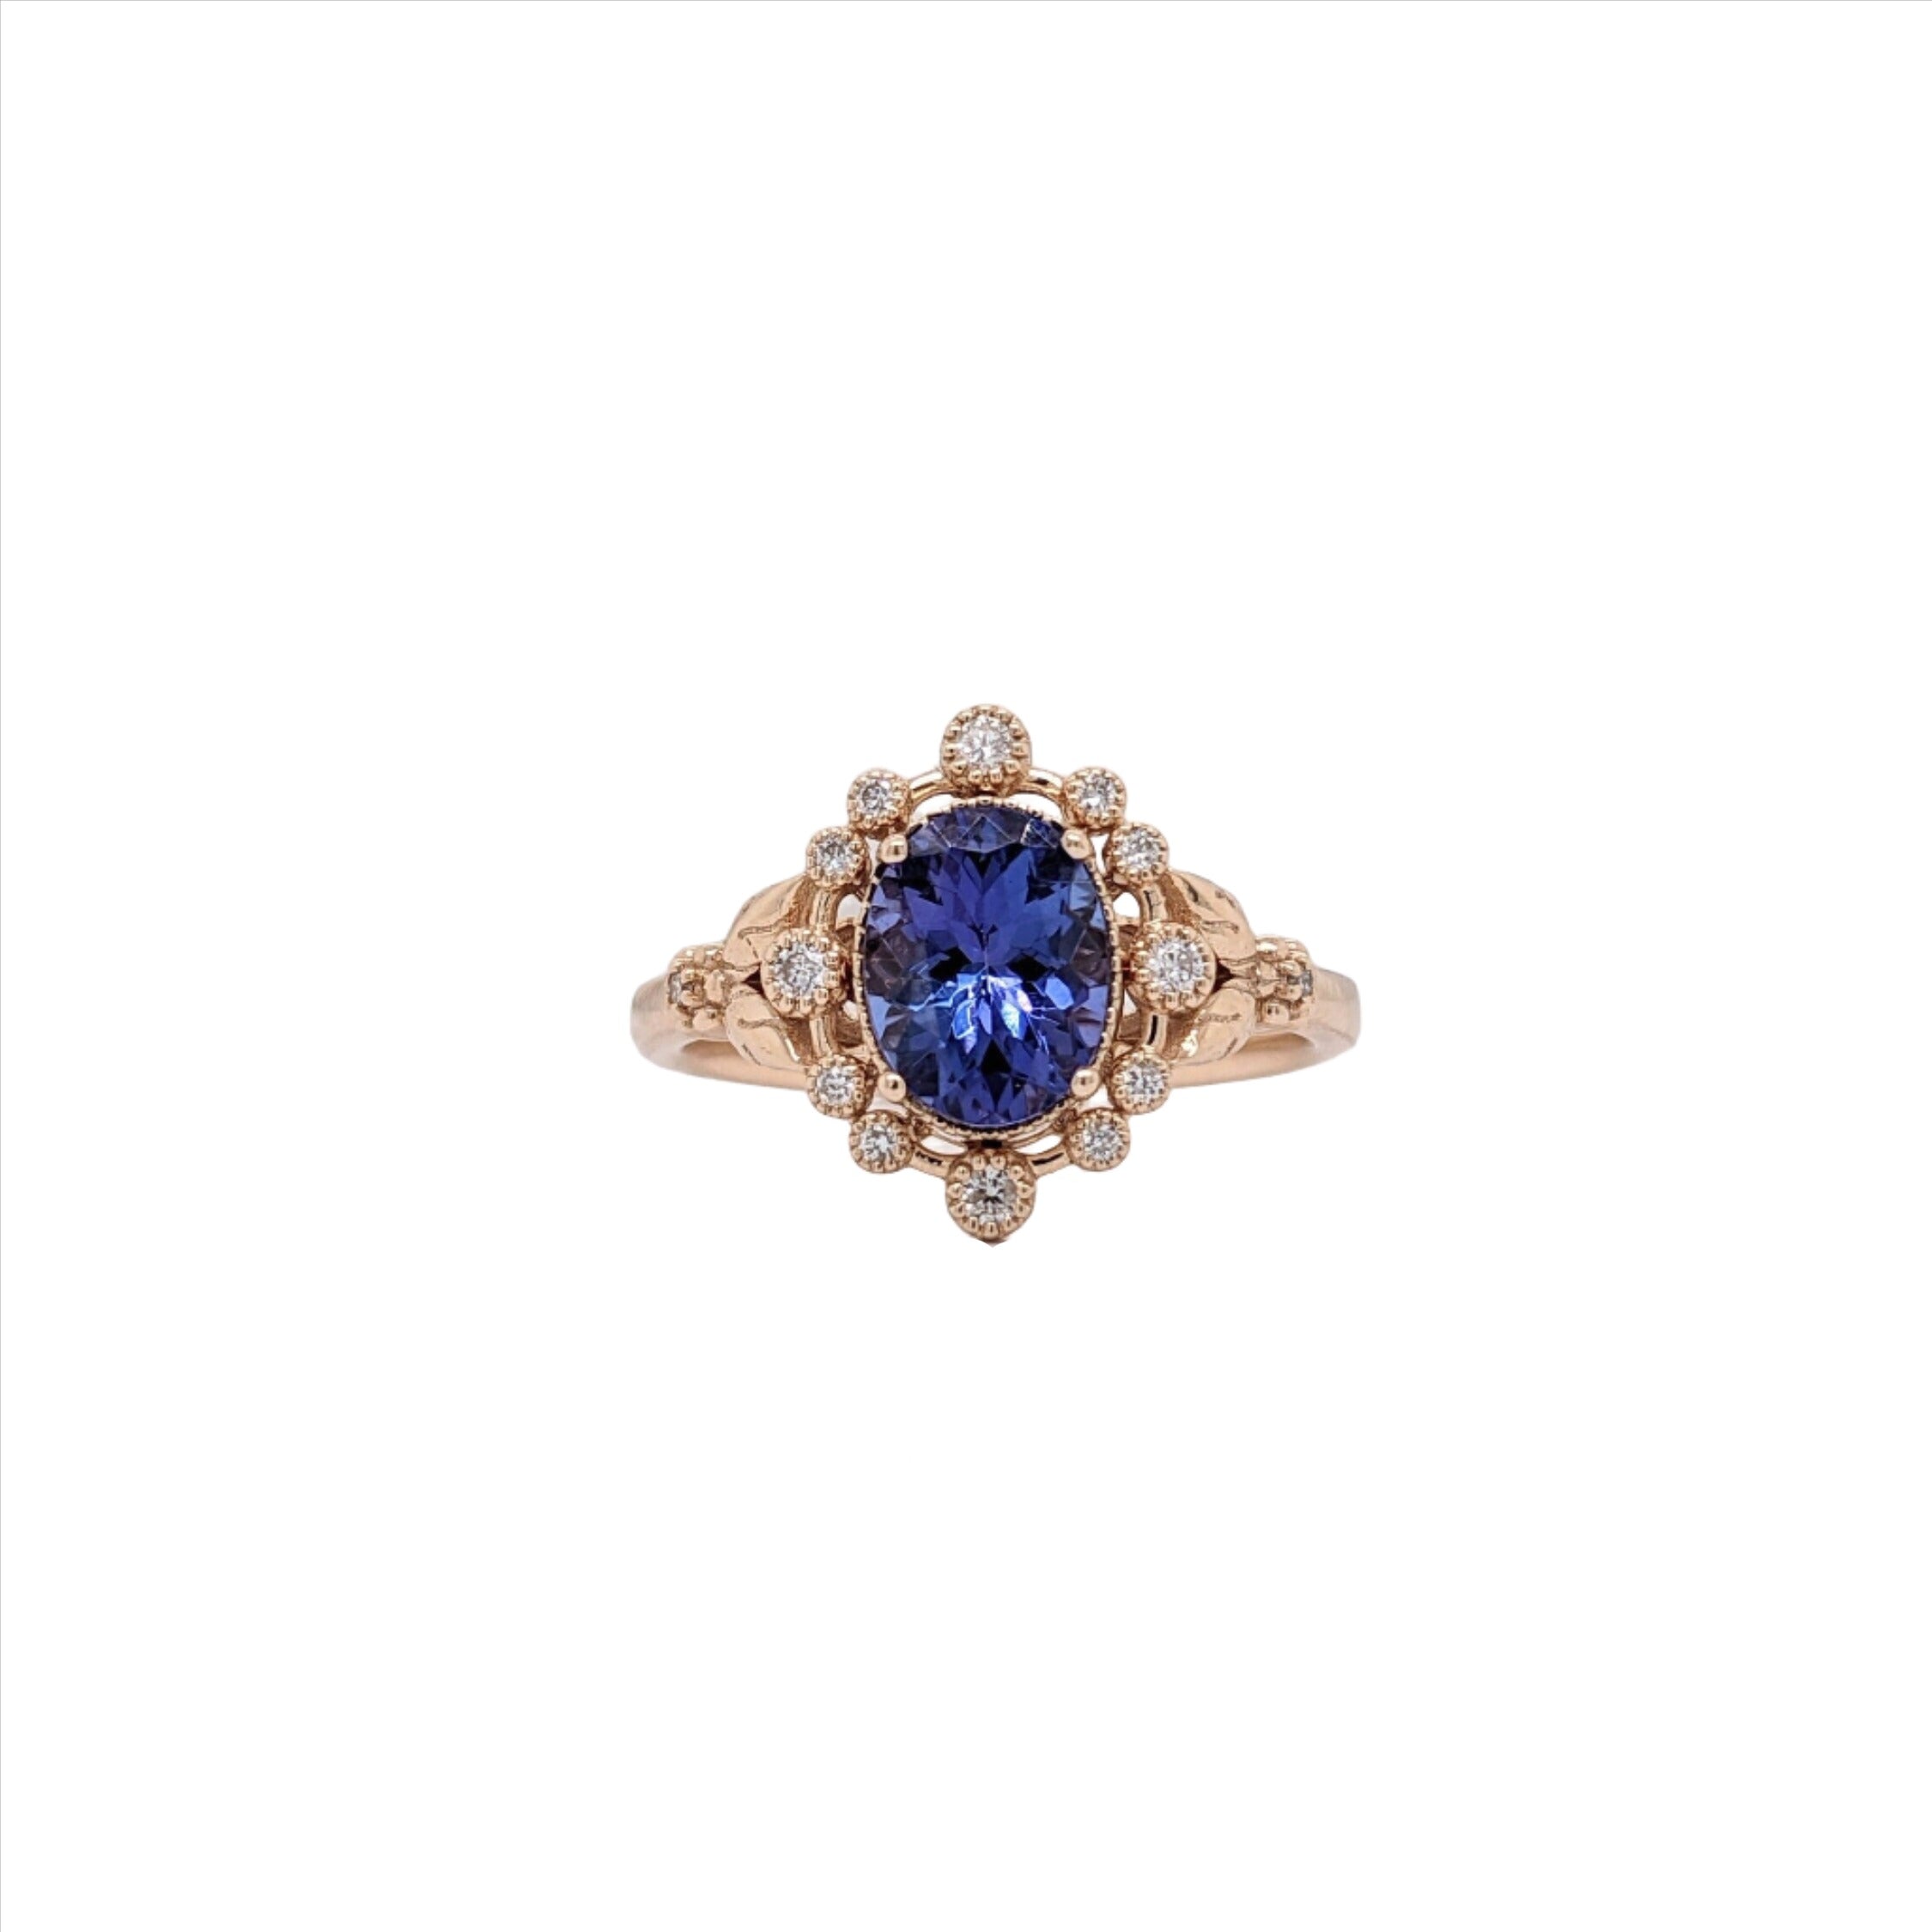 Floral Tanzanite Ring in 14k Solid Yellow, White or Rose Gold w Diamond Accent and Milgrain Detail | Oval 8x6mm | December | Bezel | Deep